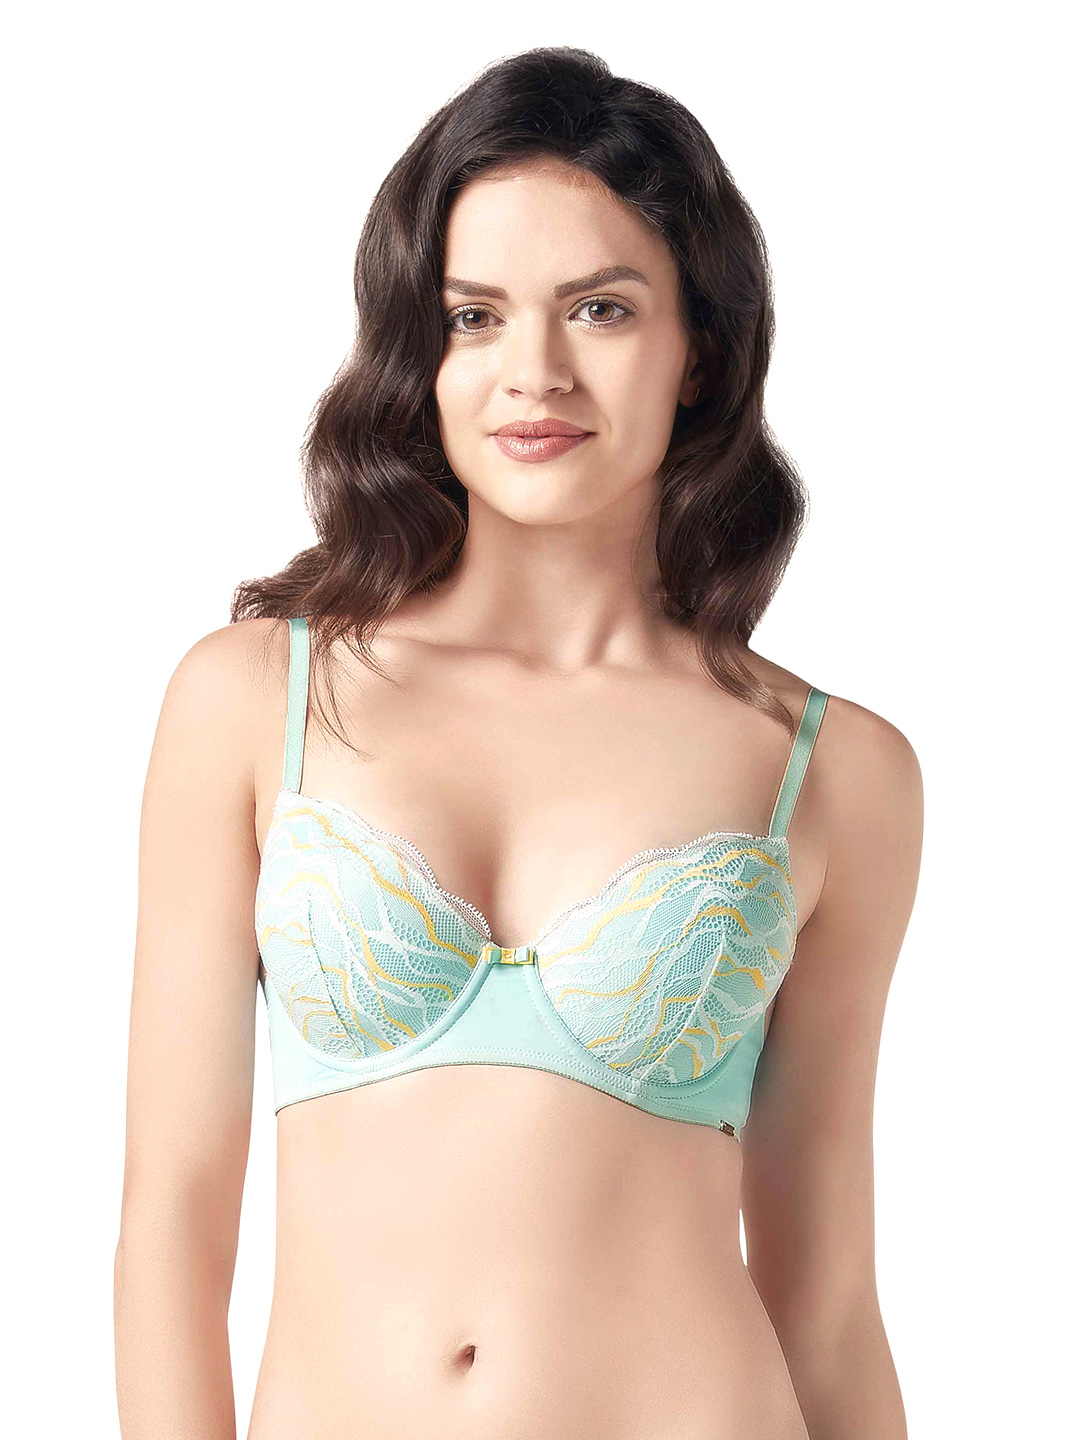 Amante Blue Lace Underwired Lightly Padded Demi Bra BRA27201 Price in India